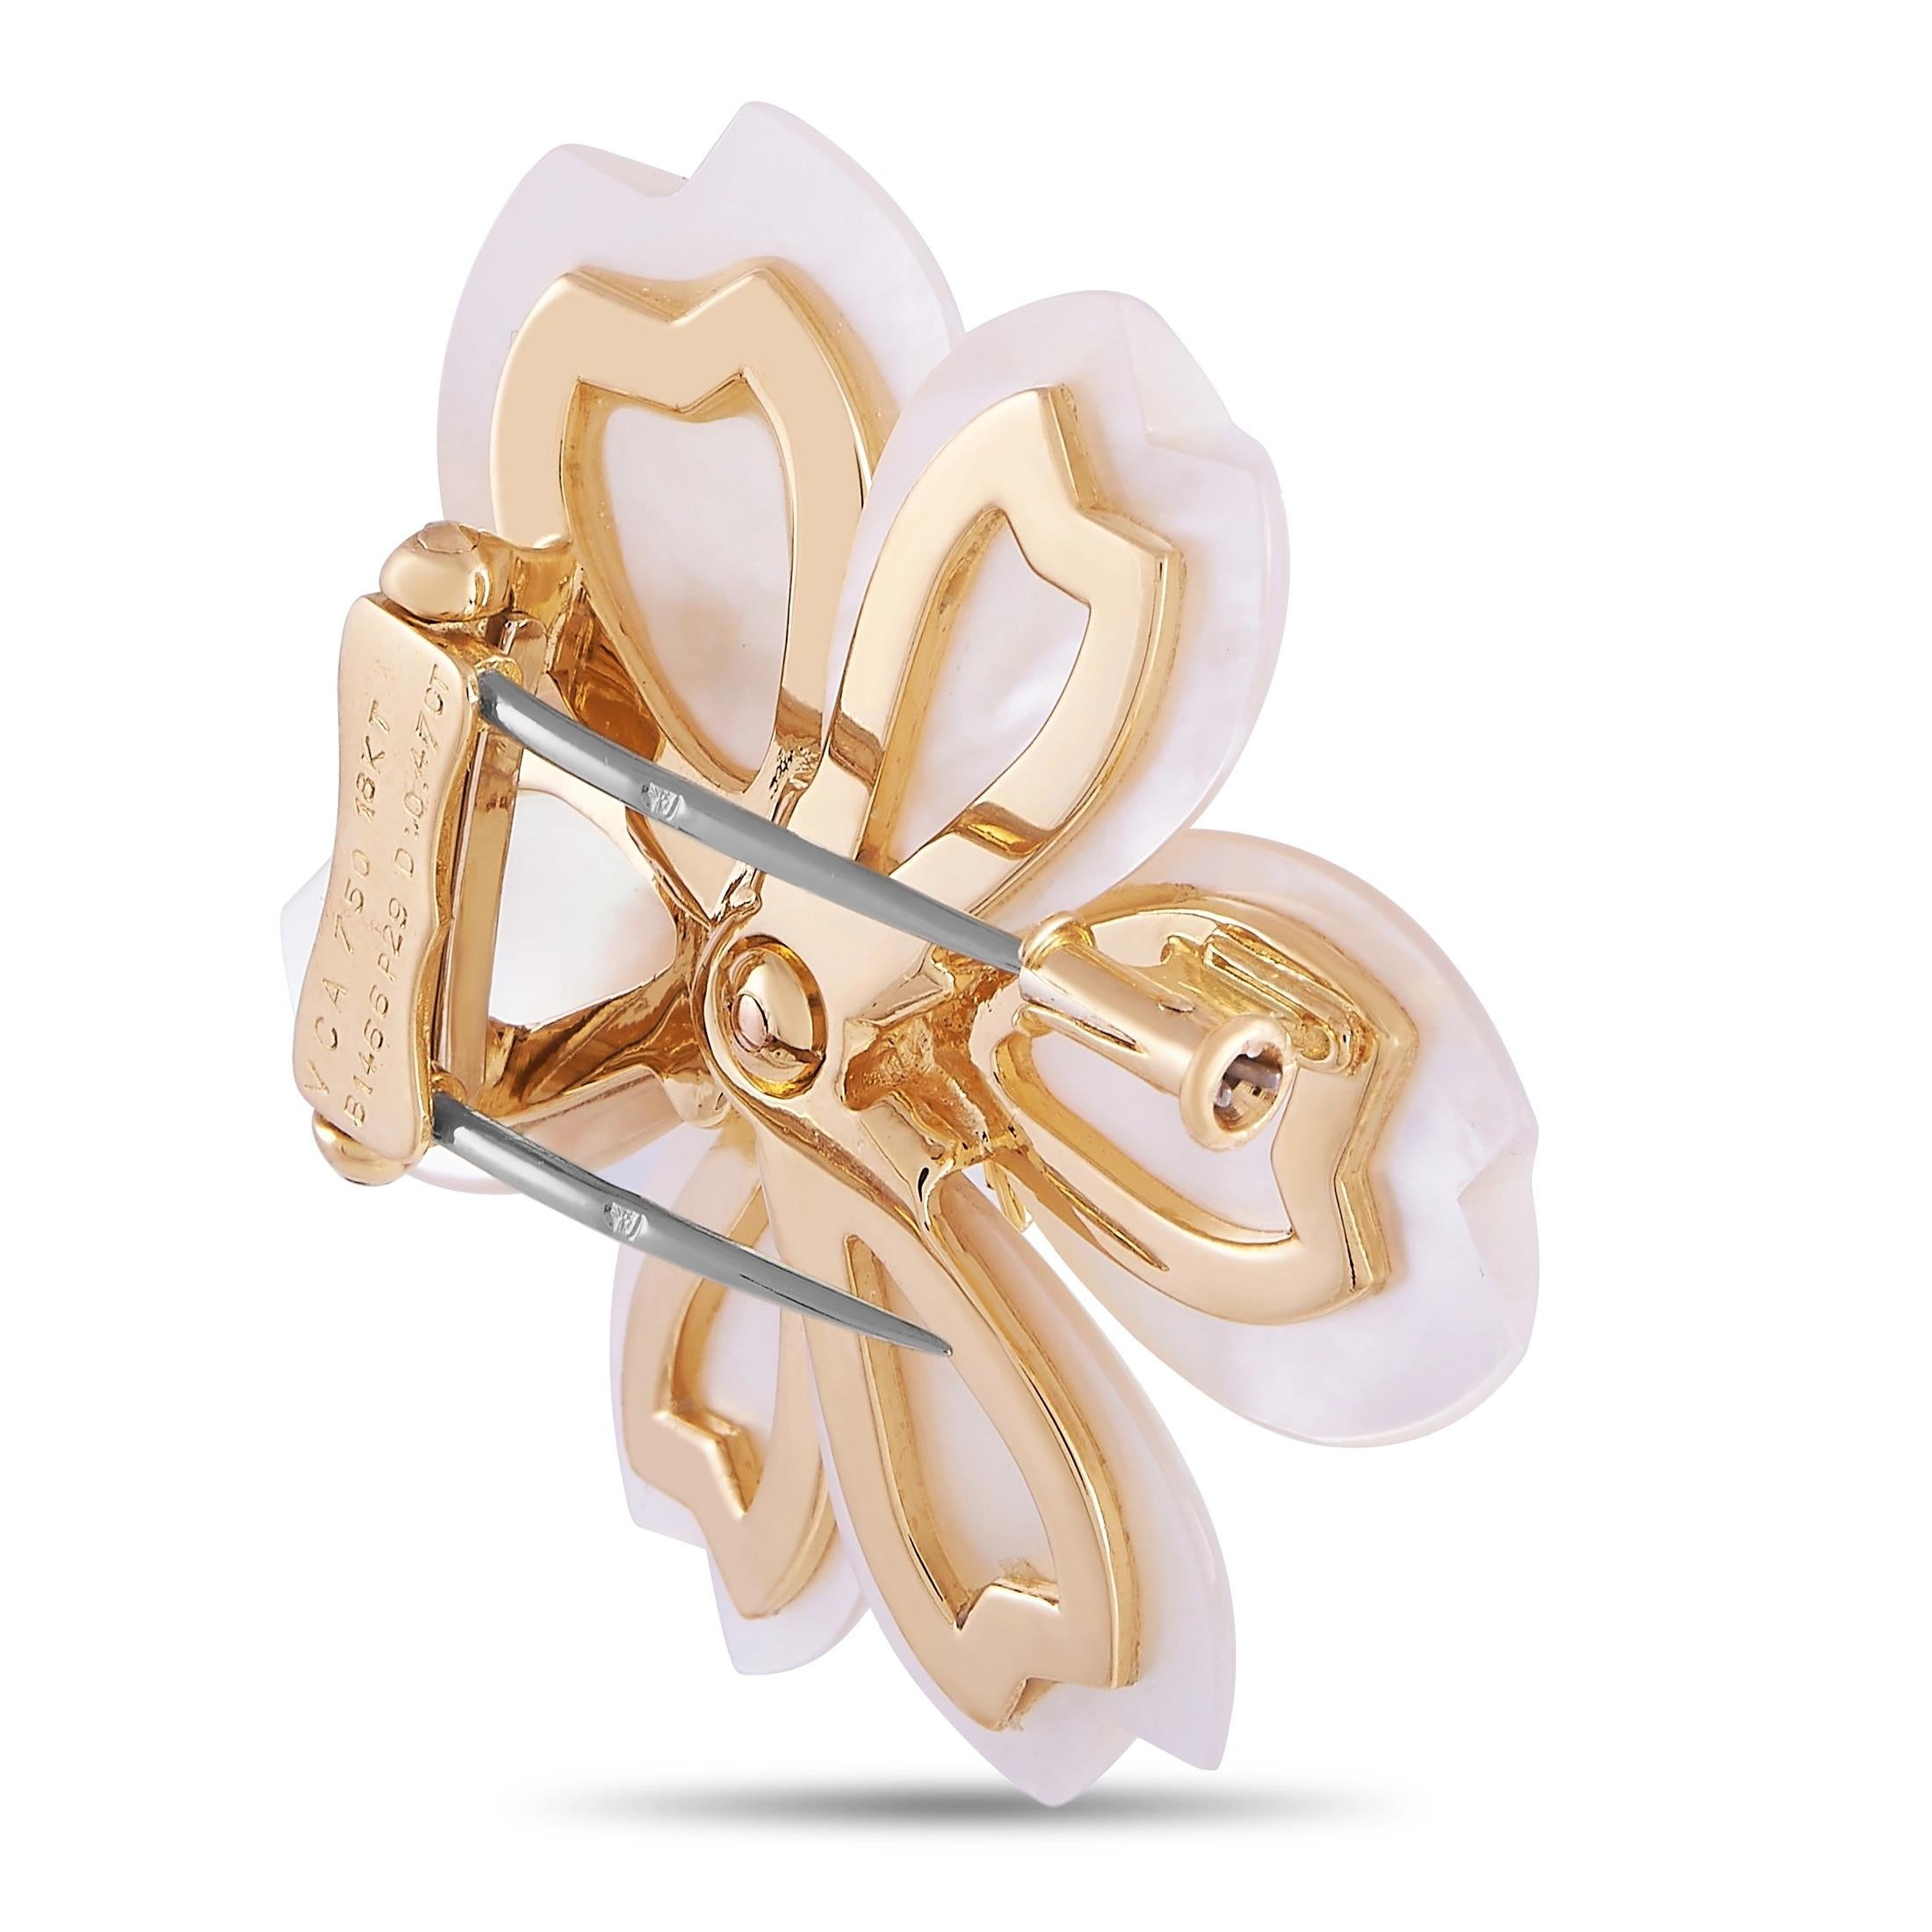 This breathtaking floral brooch from the Van Cleef & Arpels Rose de Noel collection instantly adds elegance and luxury to any ensemble. Mother of Pearl “petals” look lovely against the subtle 18K yellow gold setting. But it’s the 0.46 carats of